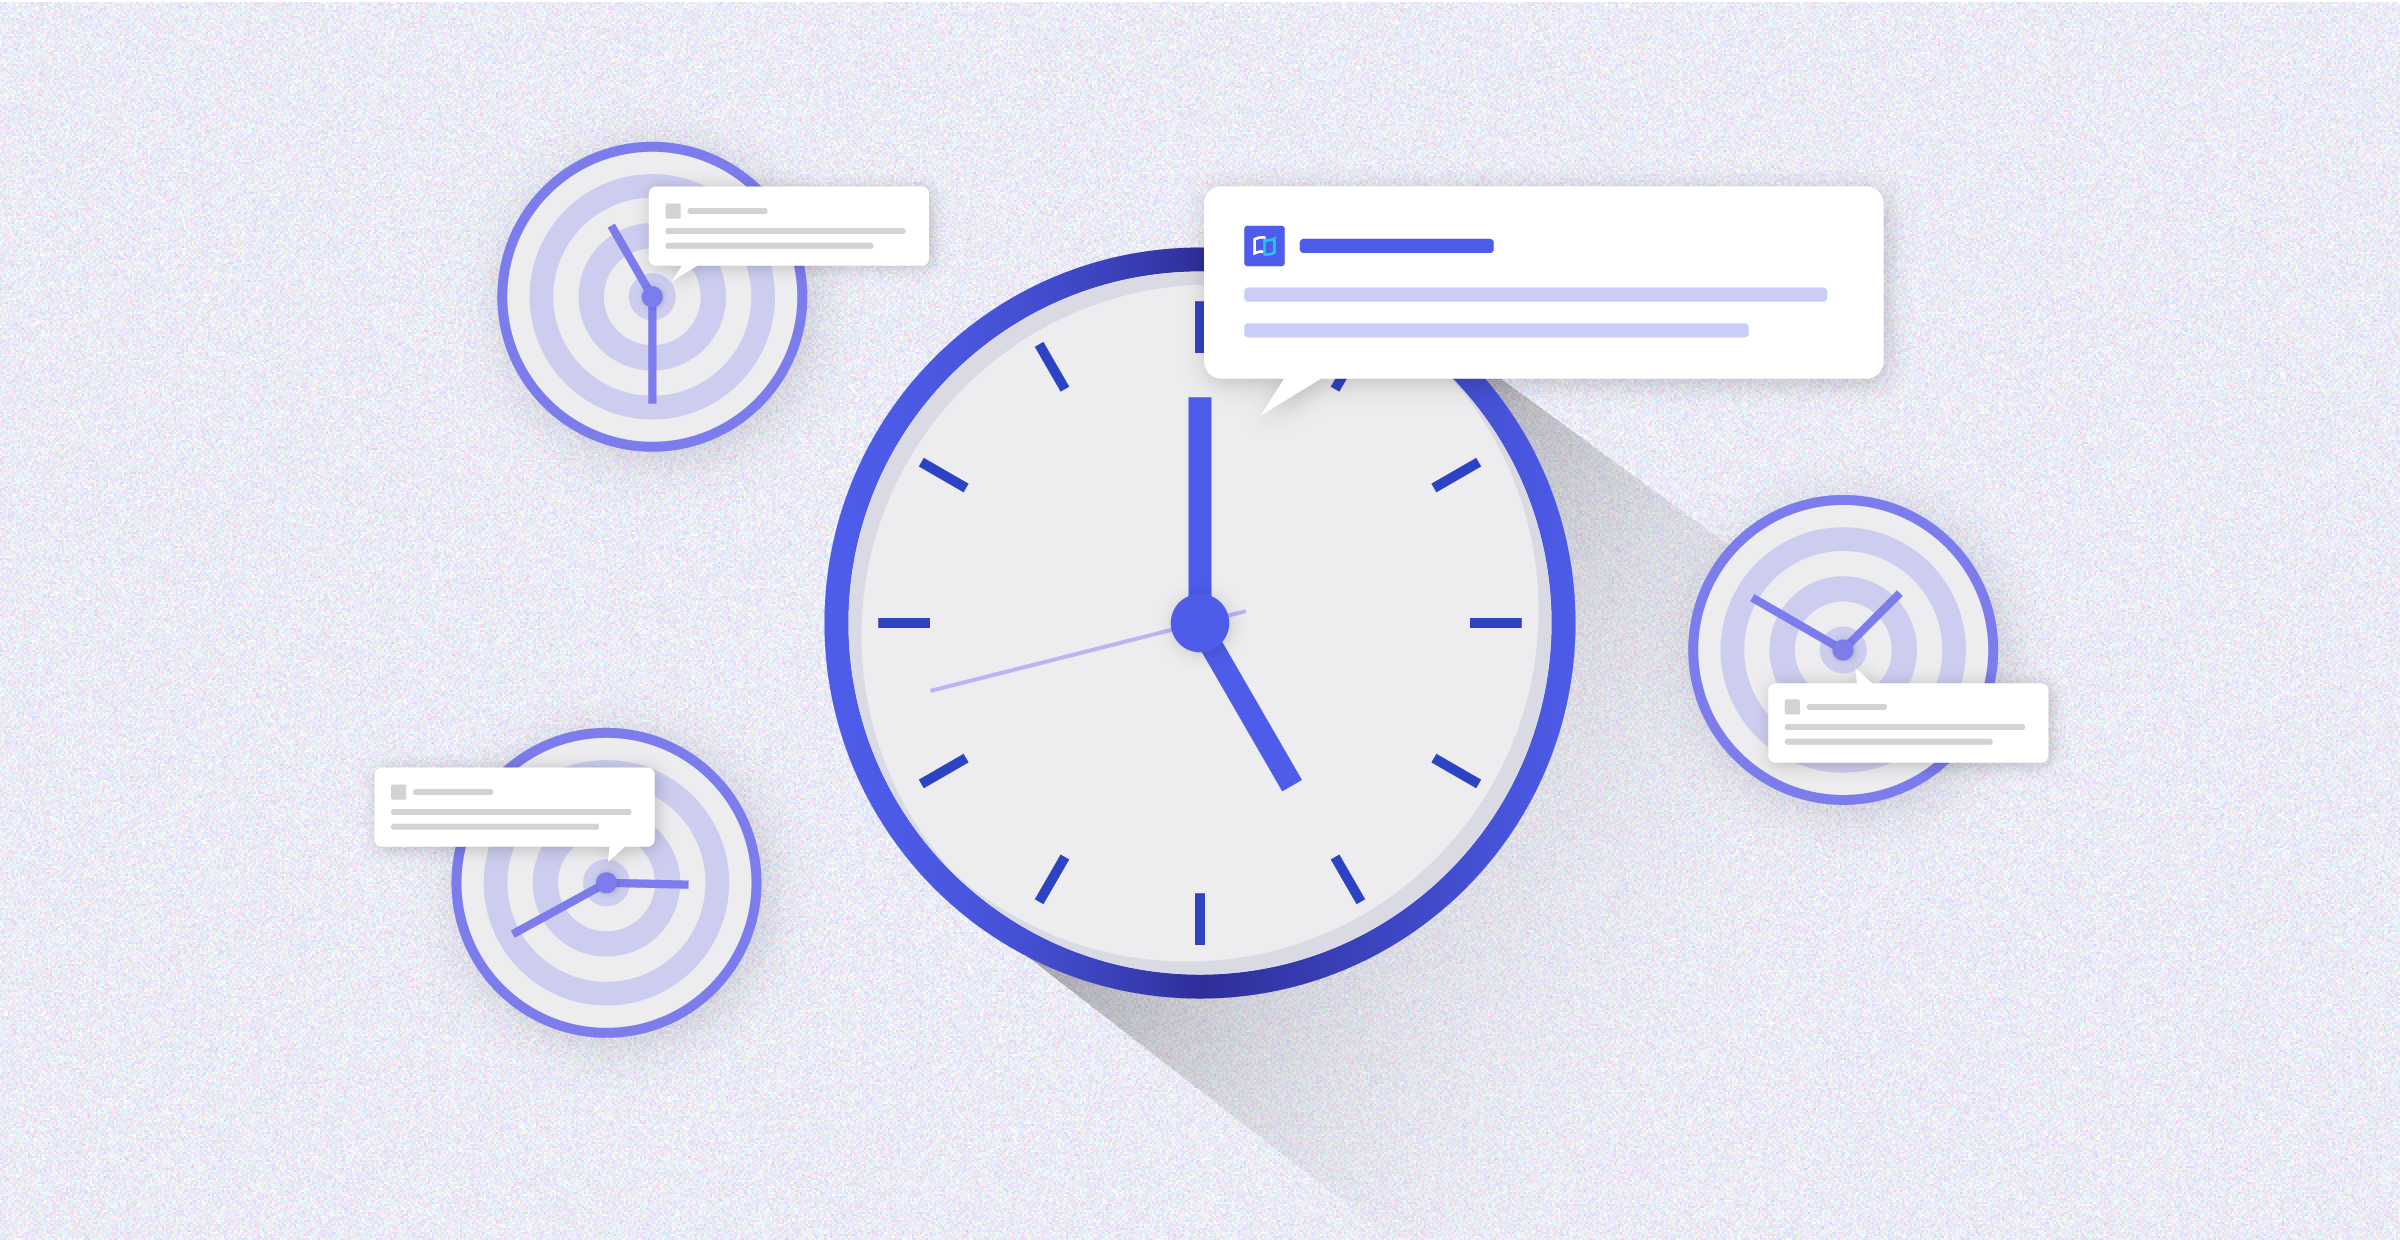 An image with multiple clocks stressing the importance of timing in push notifications.